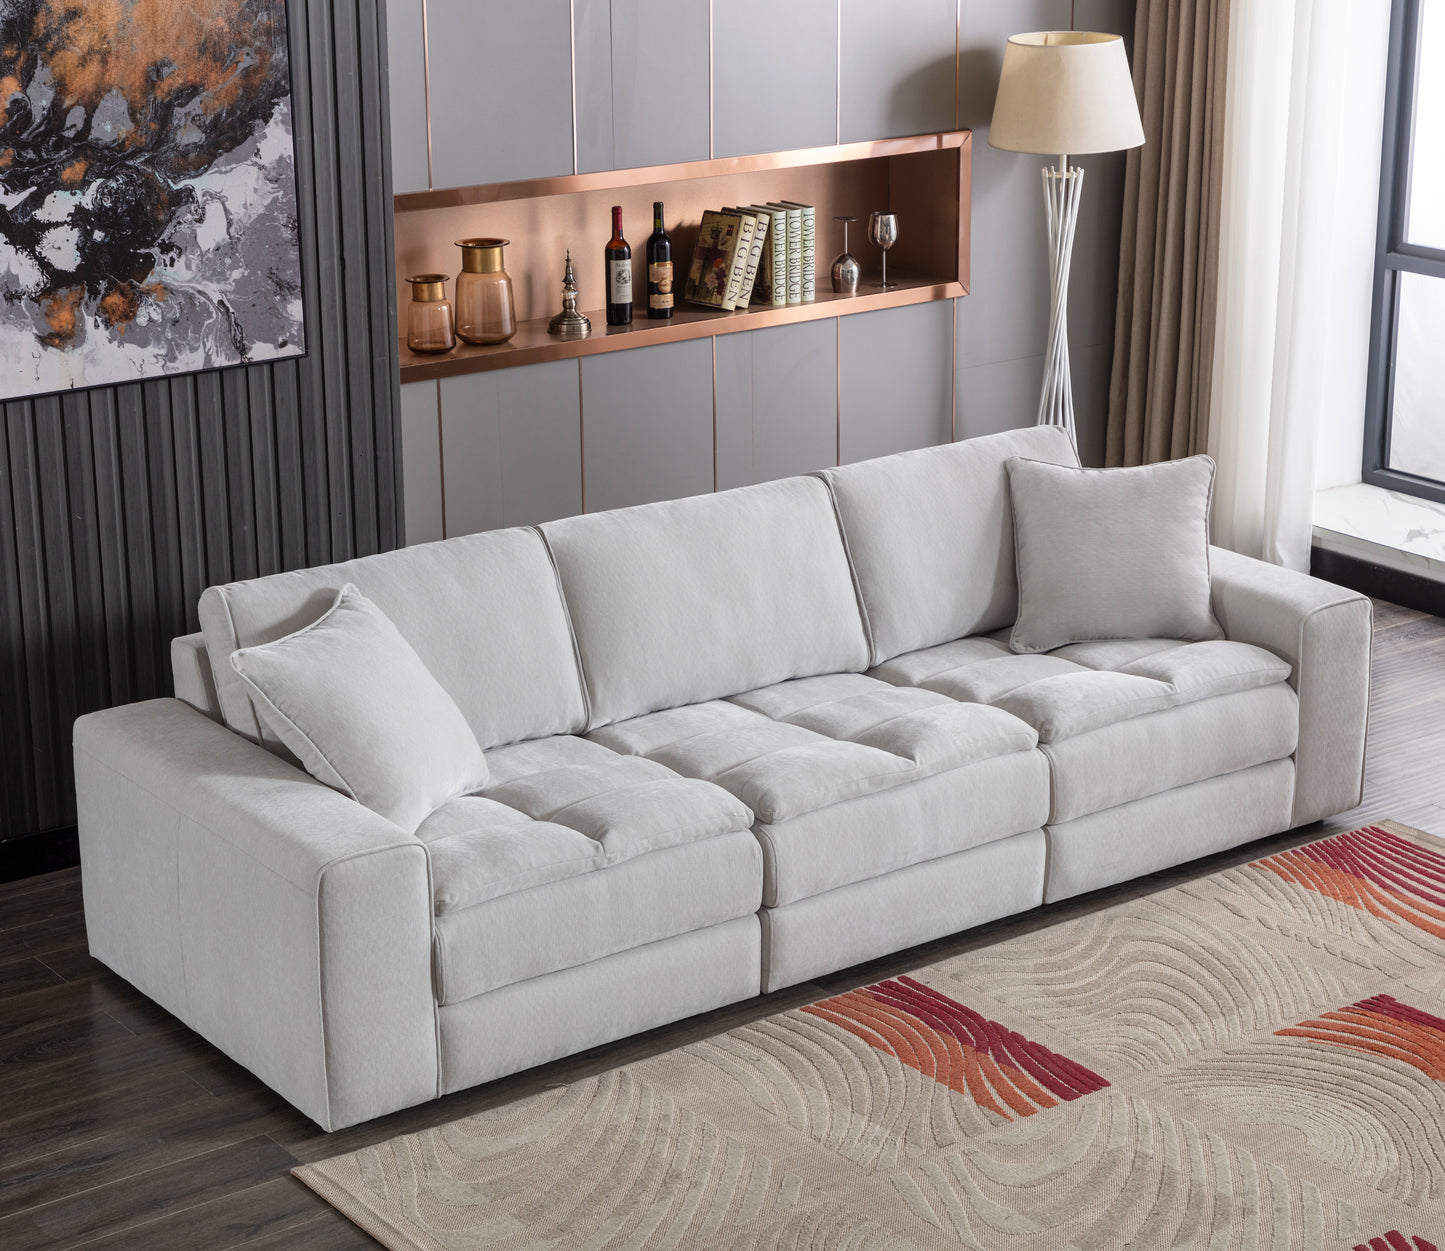 Breton Contemporary Fabric Tufted Sofa with Ottoman, Oyster